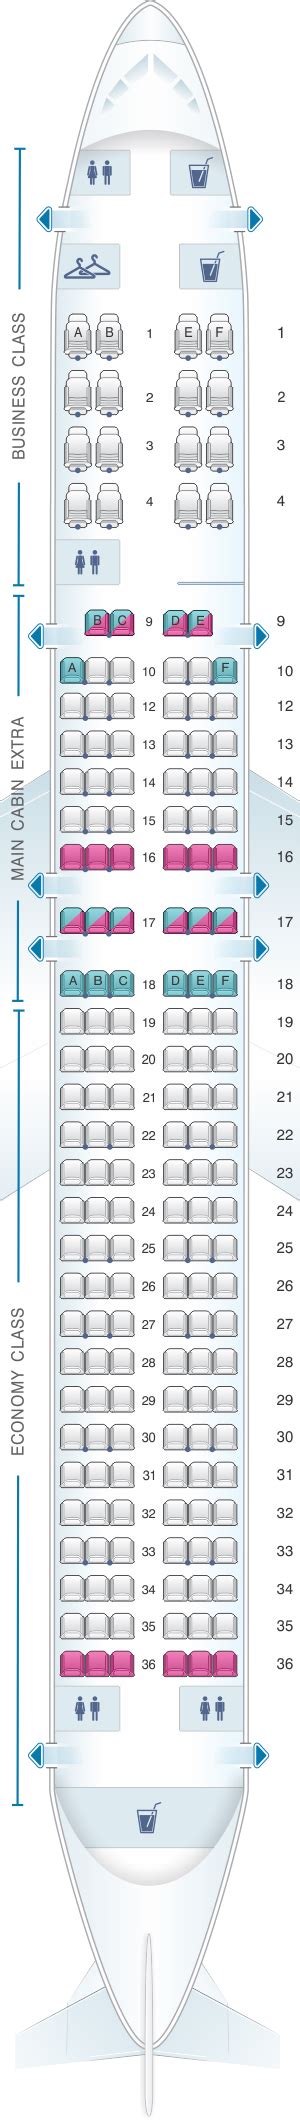 American Airlines A321 Business Class Seat Map